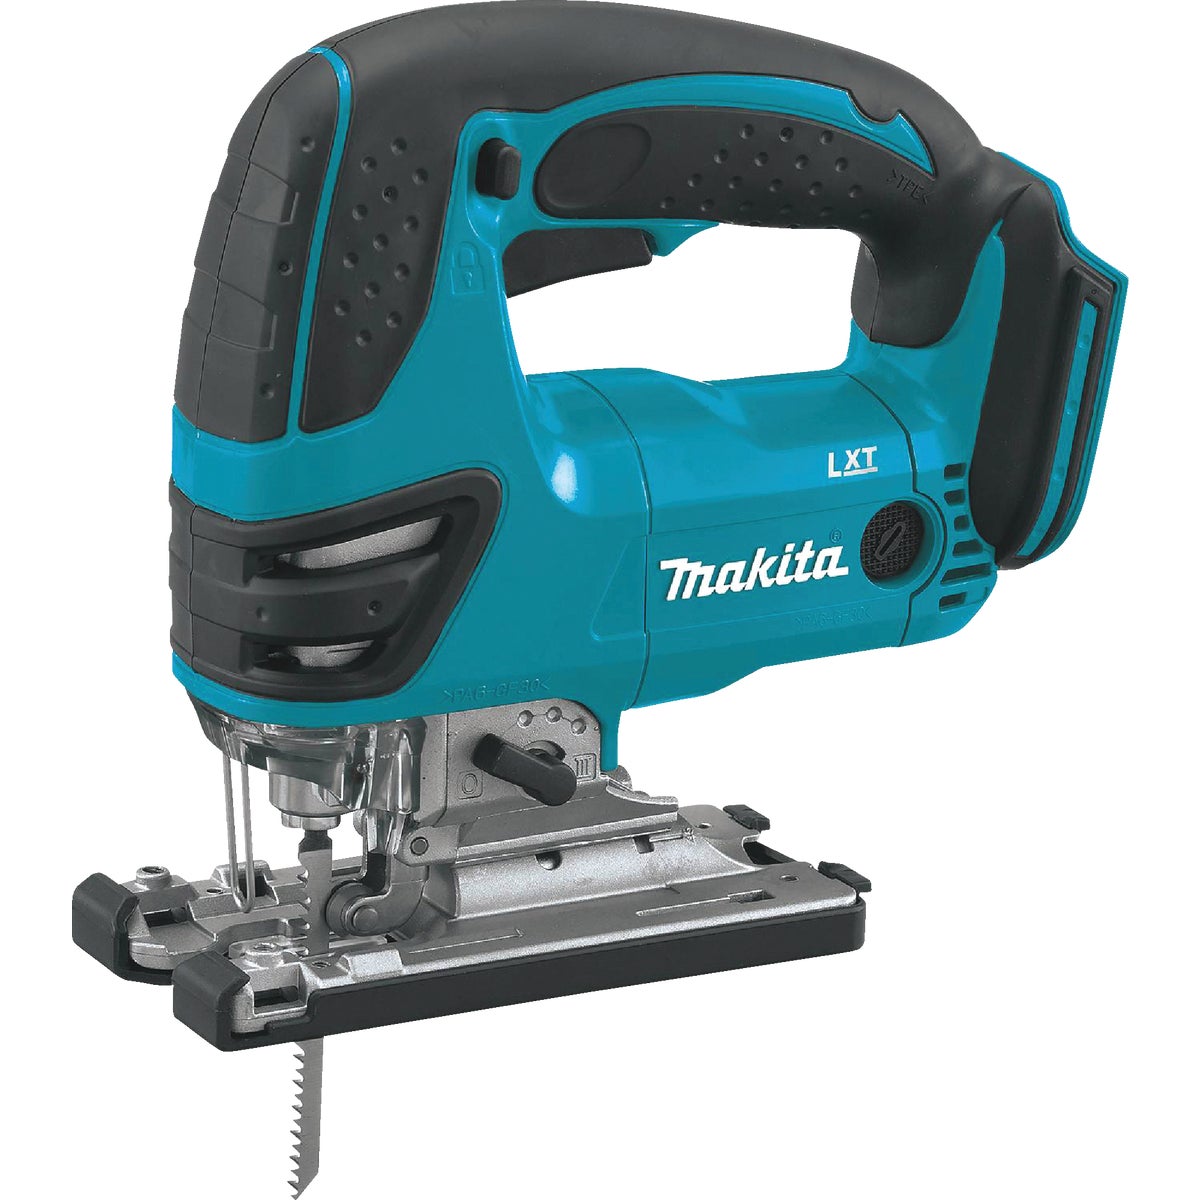 Makita 18 Volt LXT Lithium-Ion Cordless Jig Saw (Tool Only)